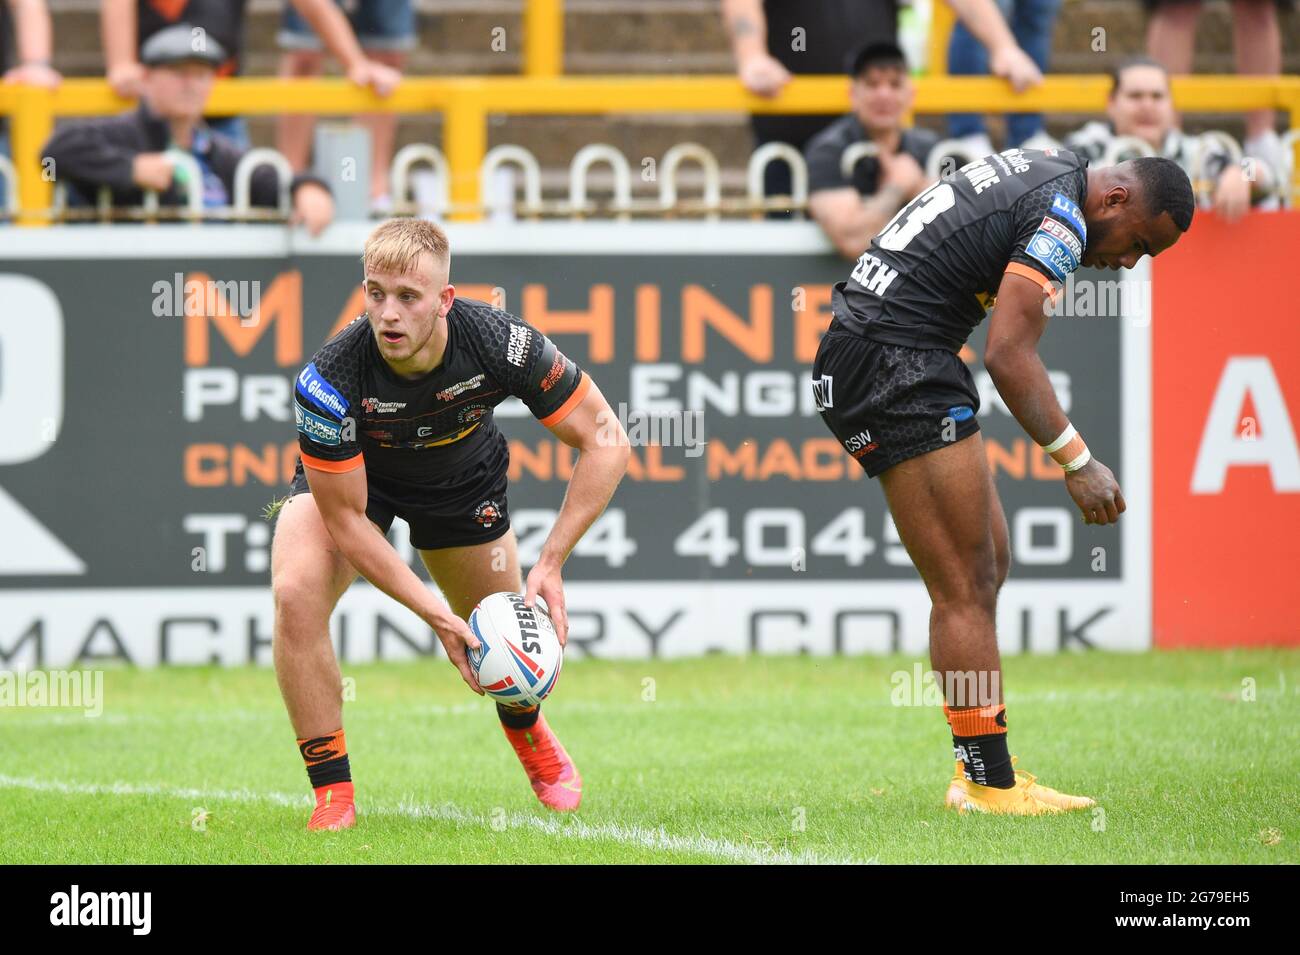 Castleford, England - 11 July 2021 - Jack Sadler of Castleford Tigers in action during the Rugby League Betfred Super League Castleford Tigers vs Salford Red Devils at The Mend-A-Hose Stadium, Castleford, UK  Dean Williams/Alamy Live Stock Photo